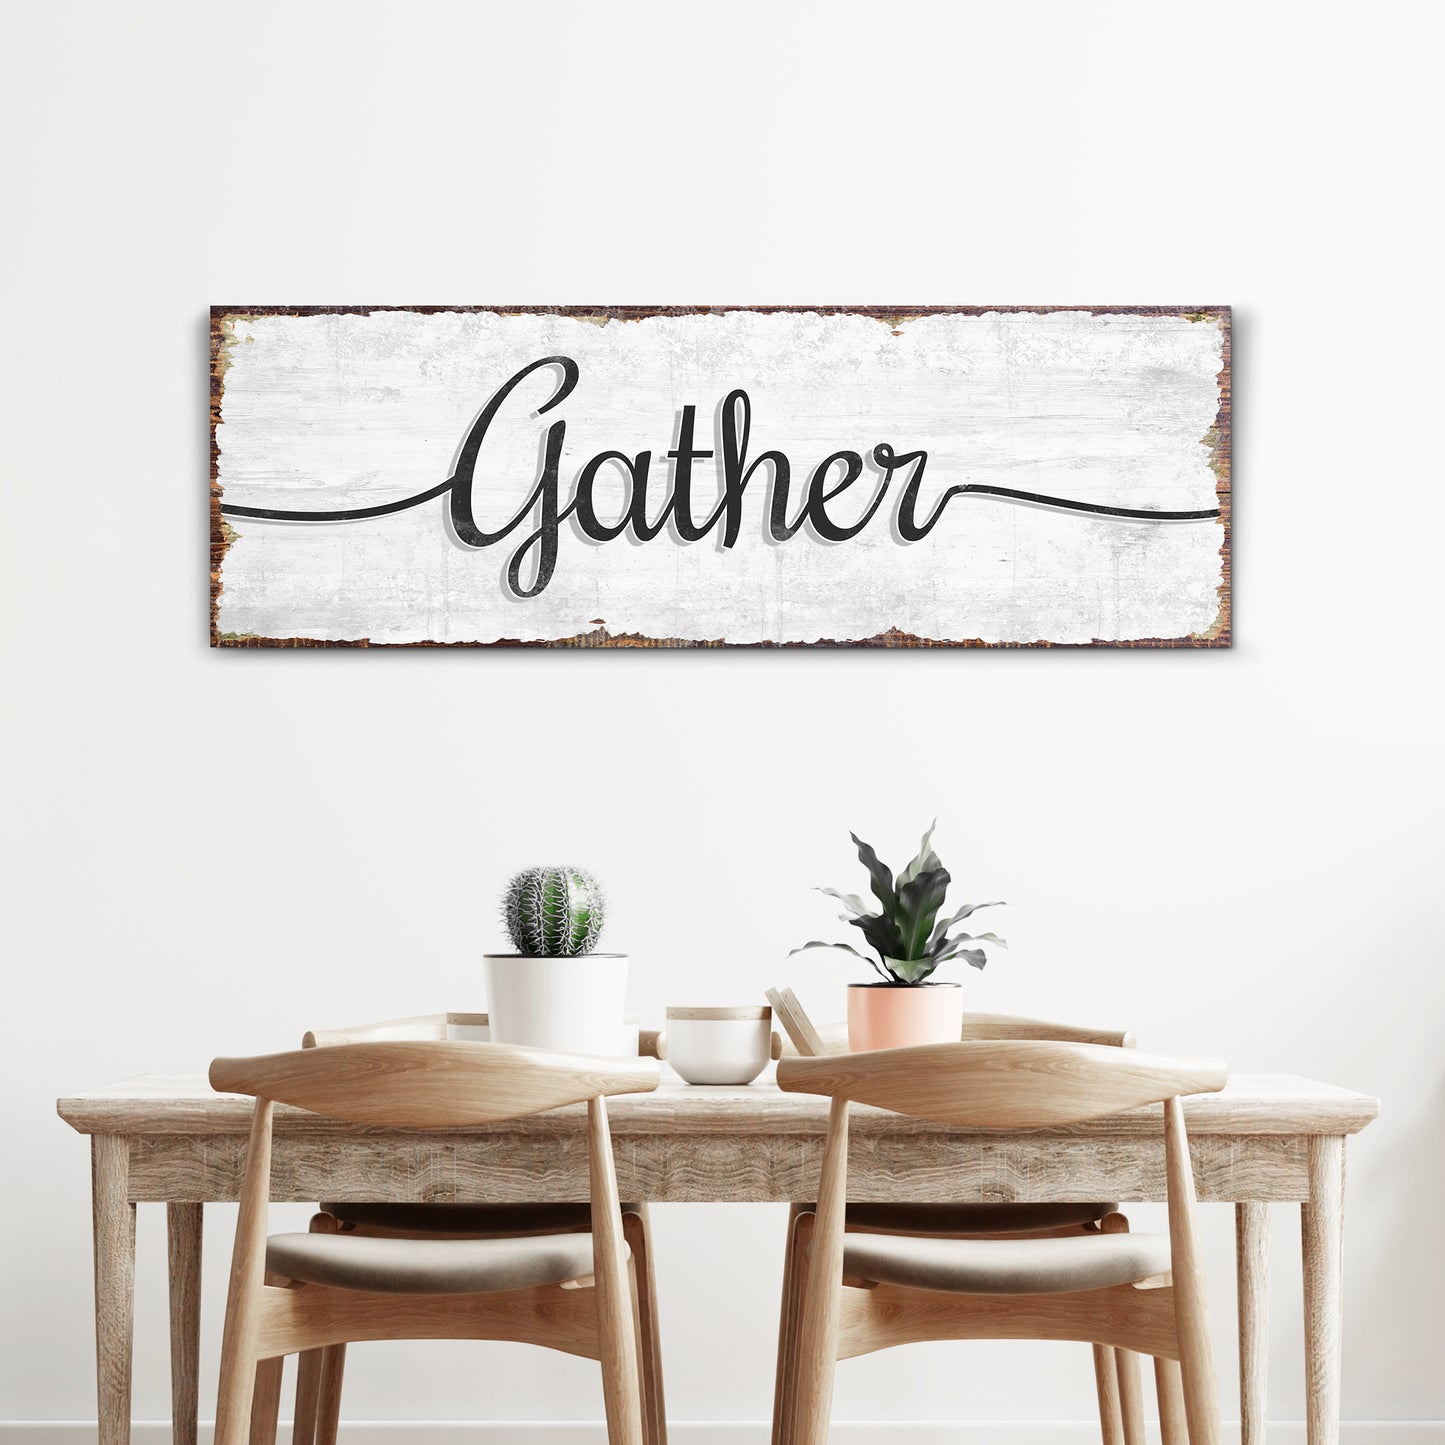 Gather Wall Art Sign Style 2 - Image by Tailored Canvases